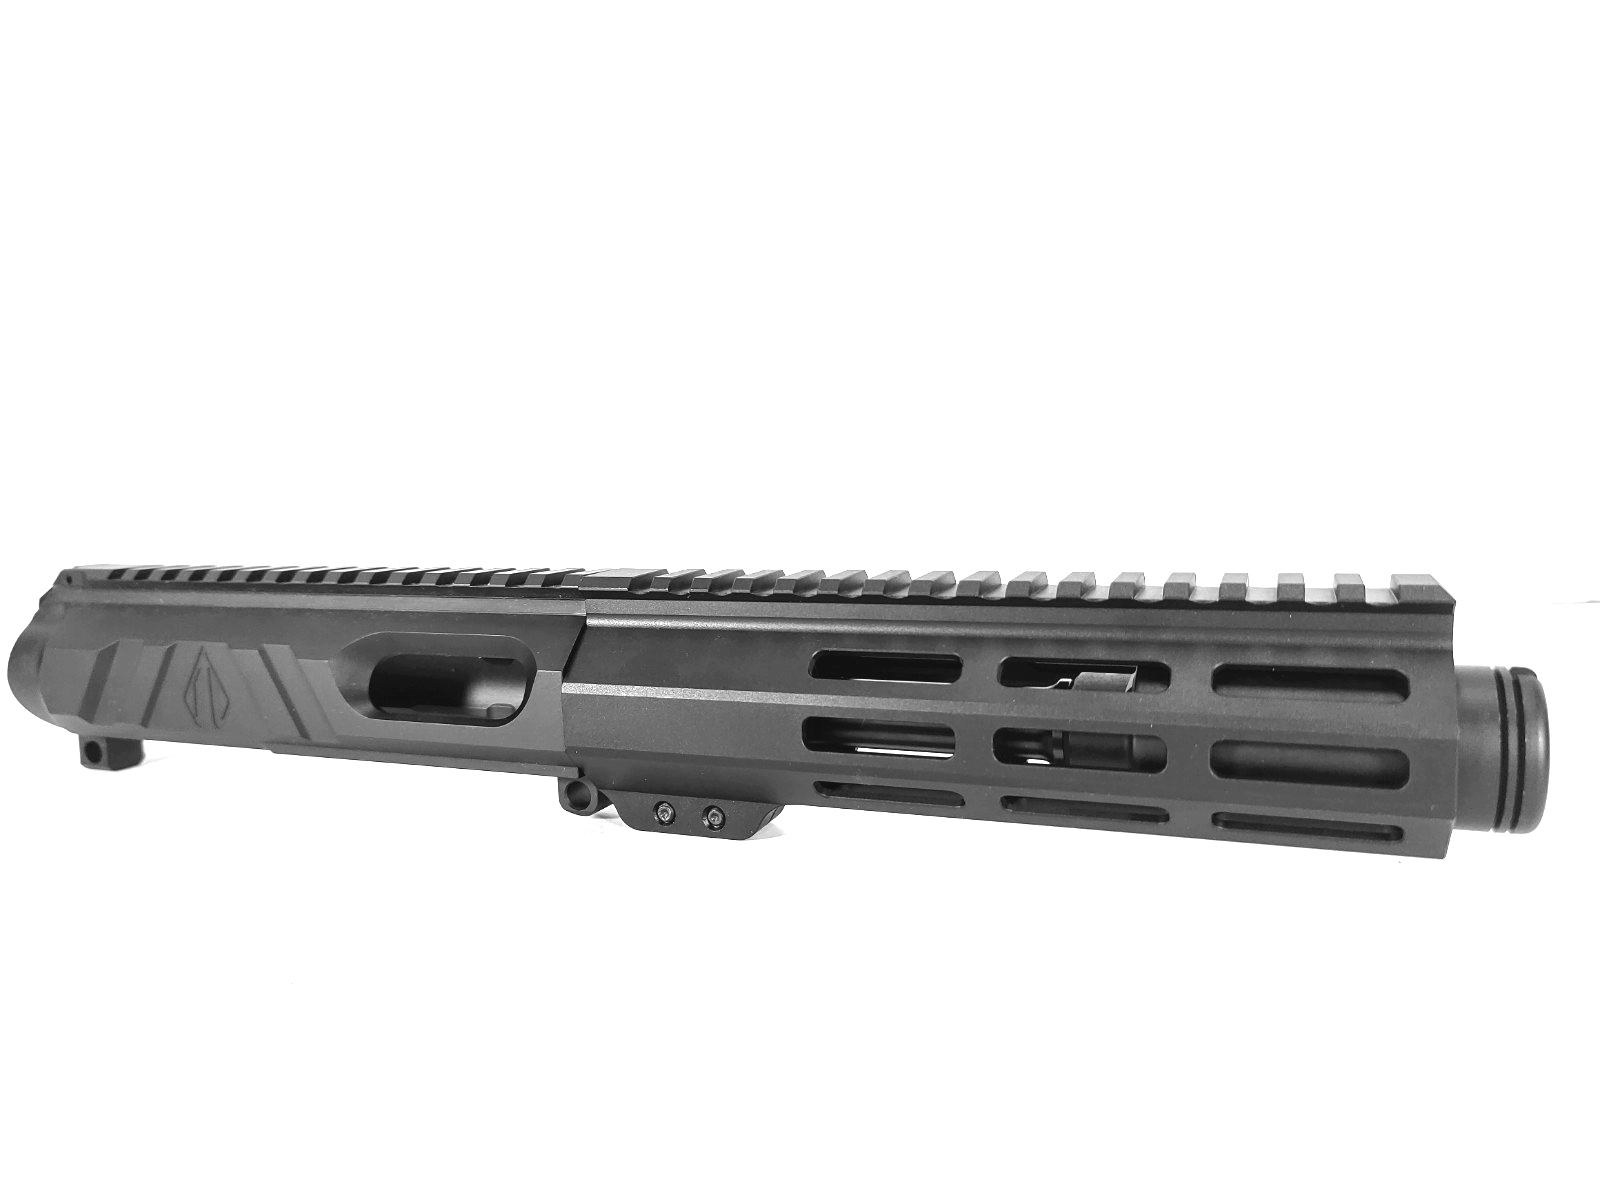 PRO2A 5.5" 40 S&W 1/16 Pistol Caliber NR Side Charging Melonite M-LOK Upper with Flash Can